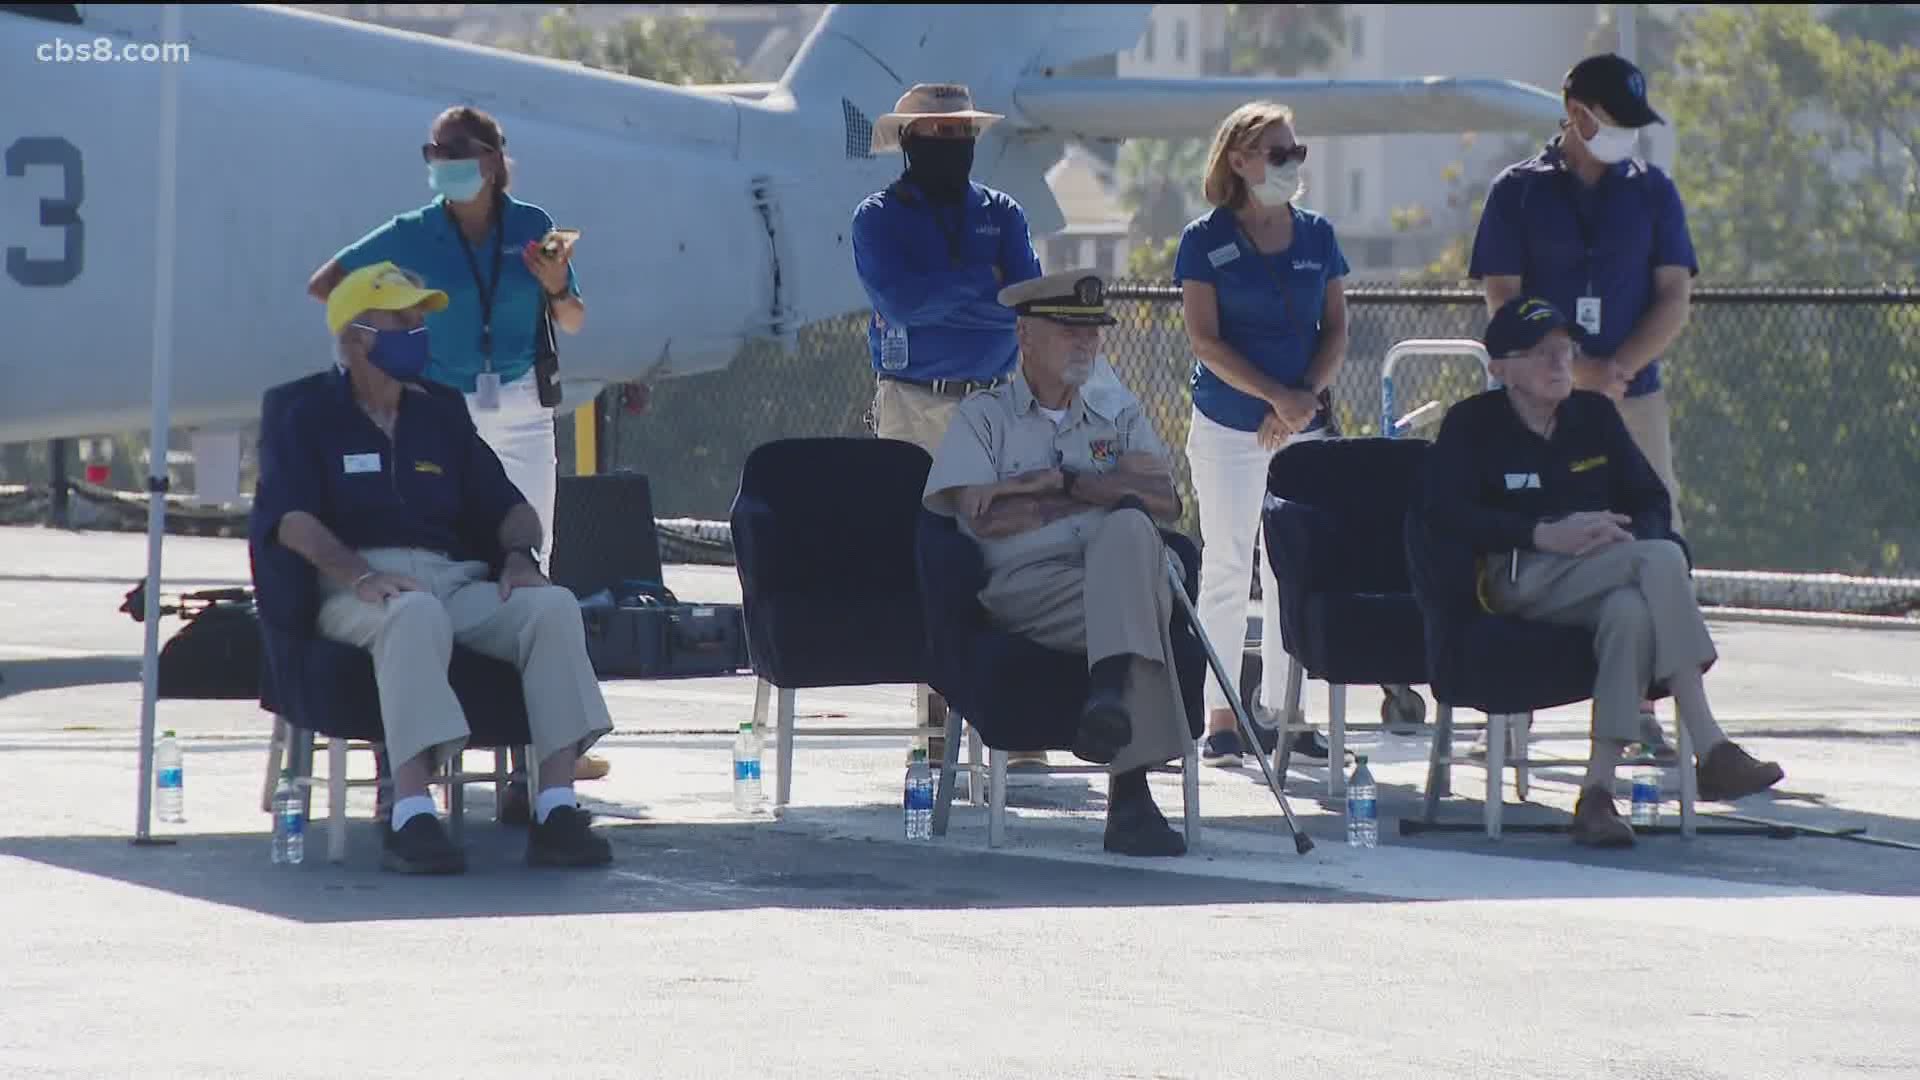 Three Navy veterans were on board to participate in the ceremony that included the laying of a wreath.